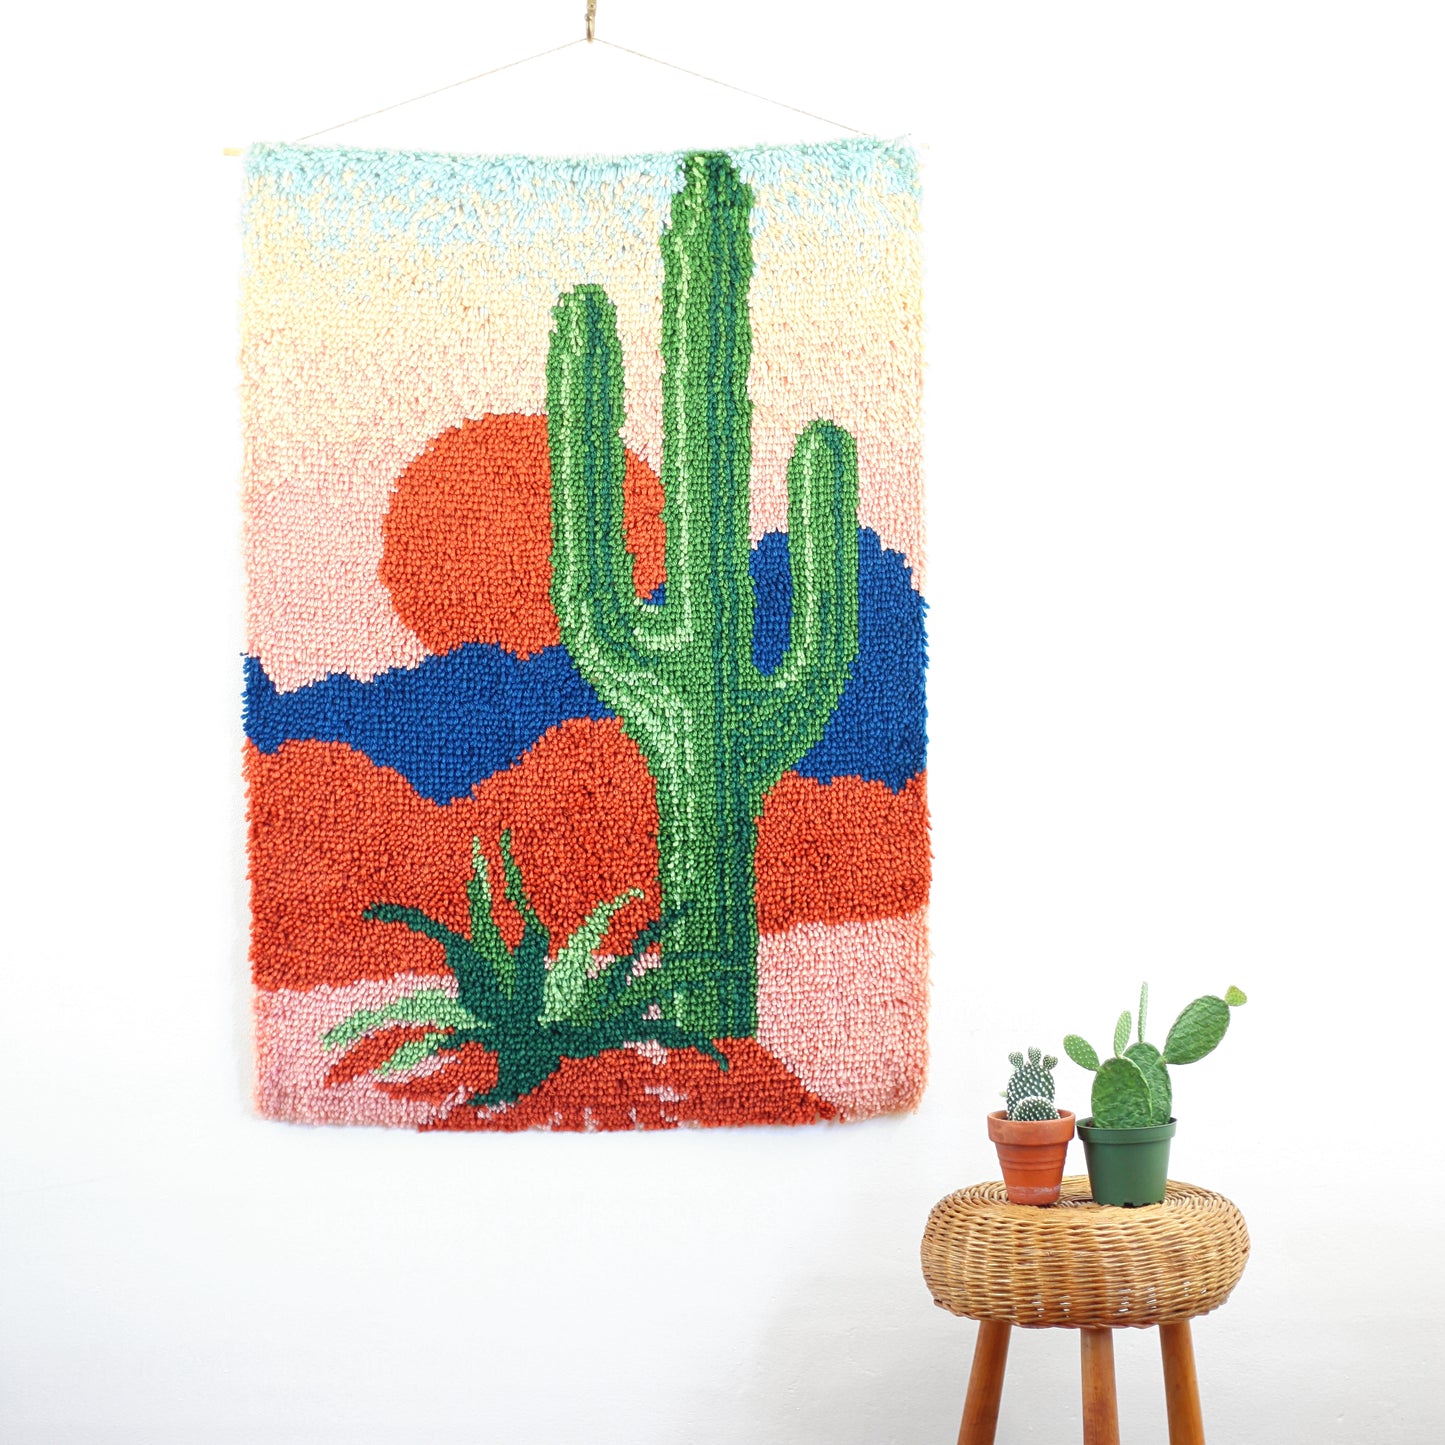 SOLD - Vintage Cactus Latch Hook Wall Hanging